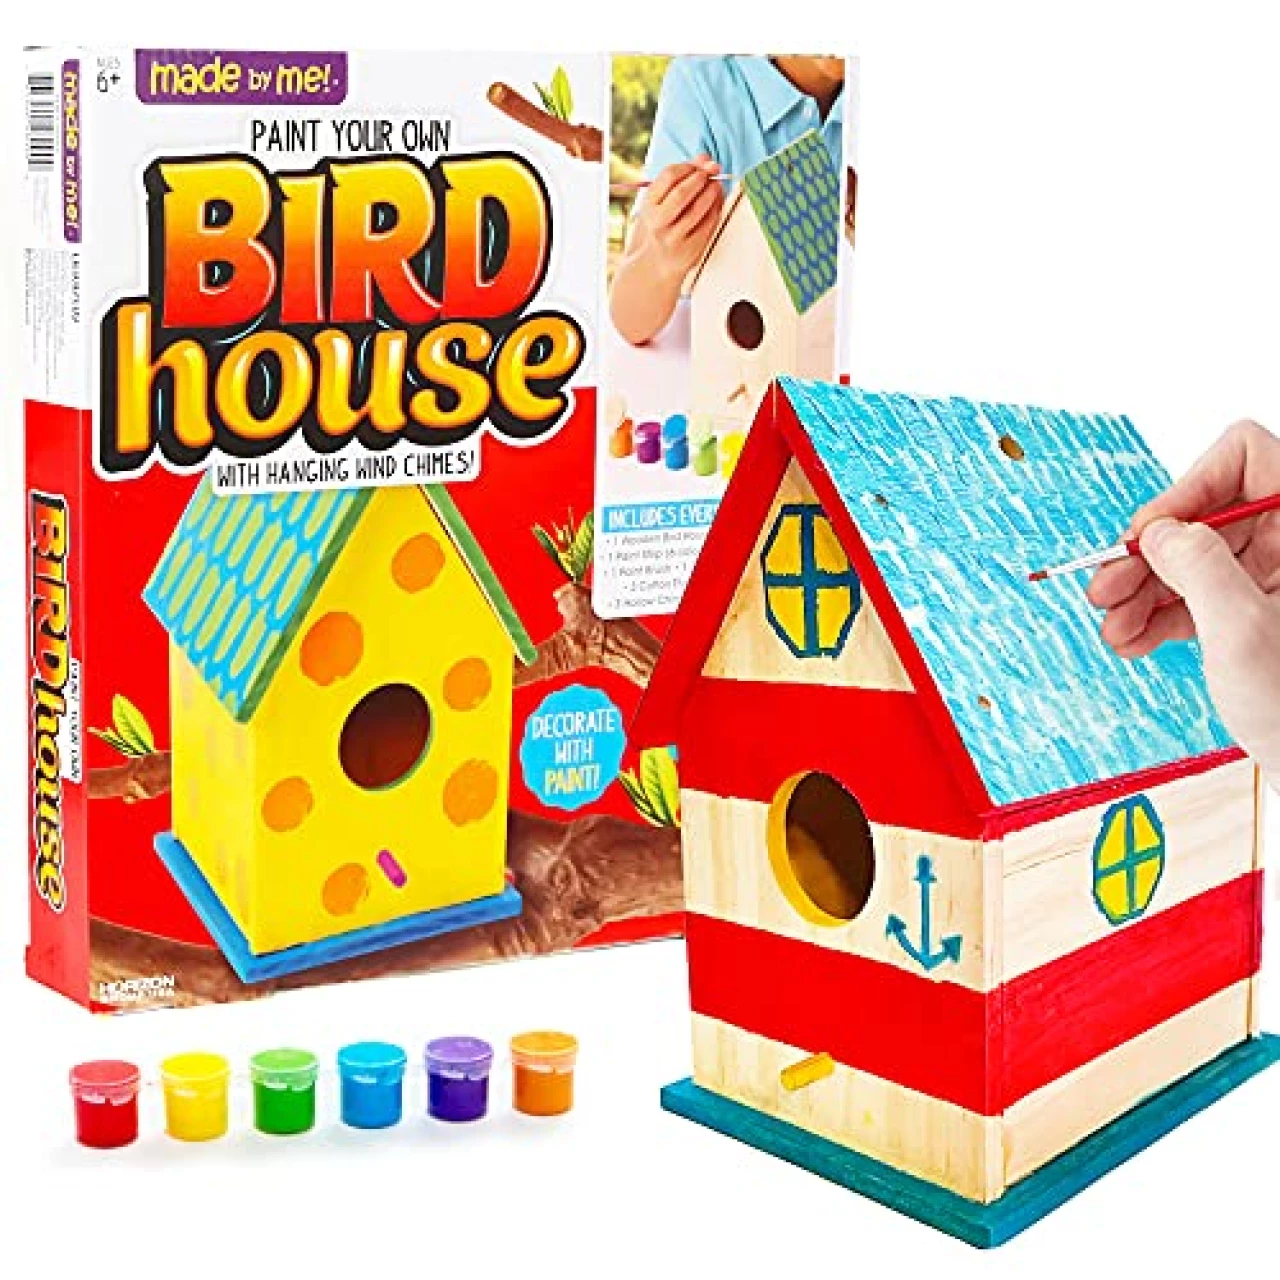 Made By Me Build &amp; Paint Your Own Wooden Bird House, DIY Birdhouse Making For Ages 5, 6, 7, 8, 9, Arts &amp; Crafts Painting Kit For Kids, Great Spring &amp; Summer Craft Activity, Fun Birthday Party Idea